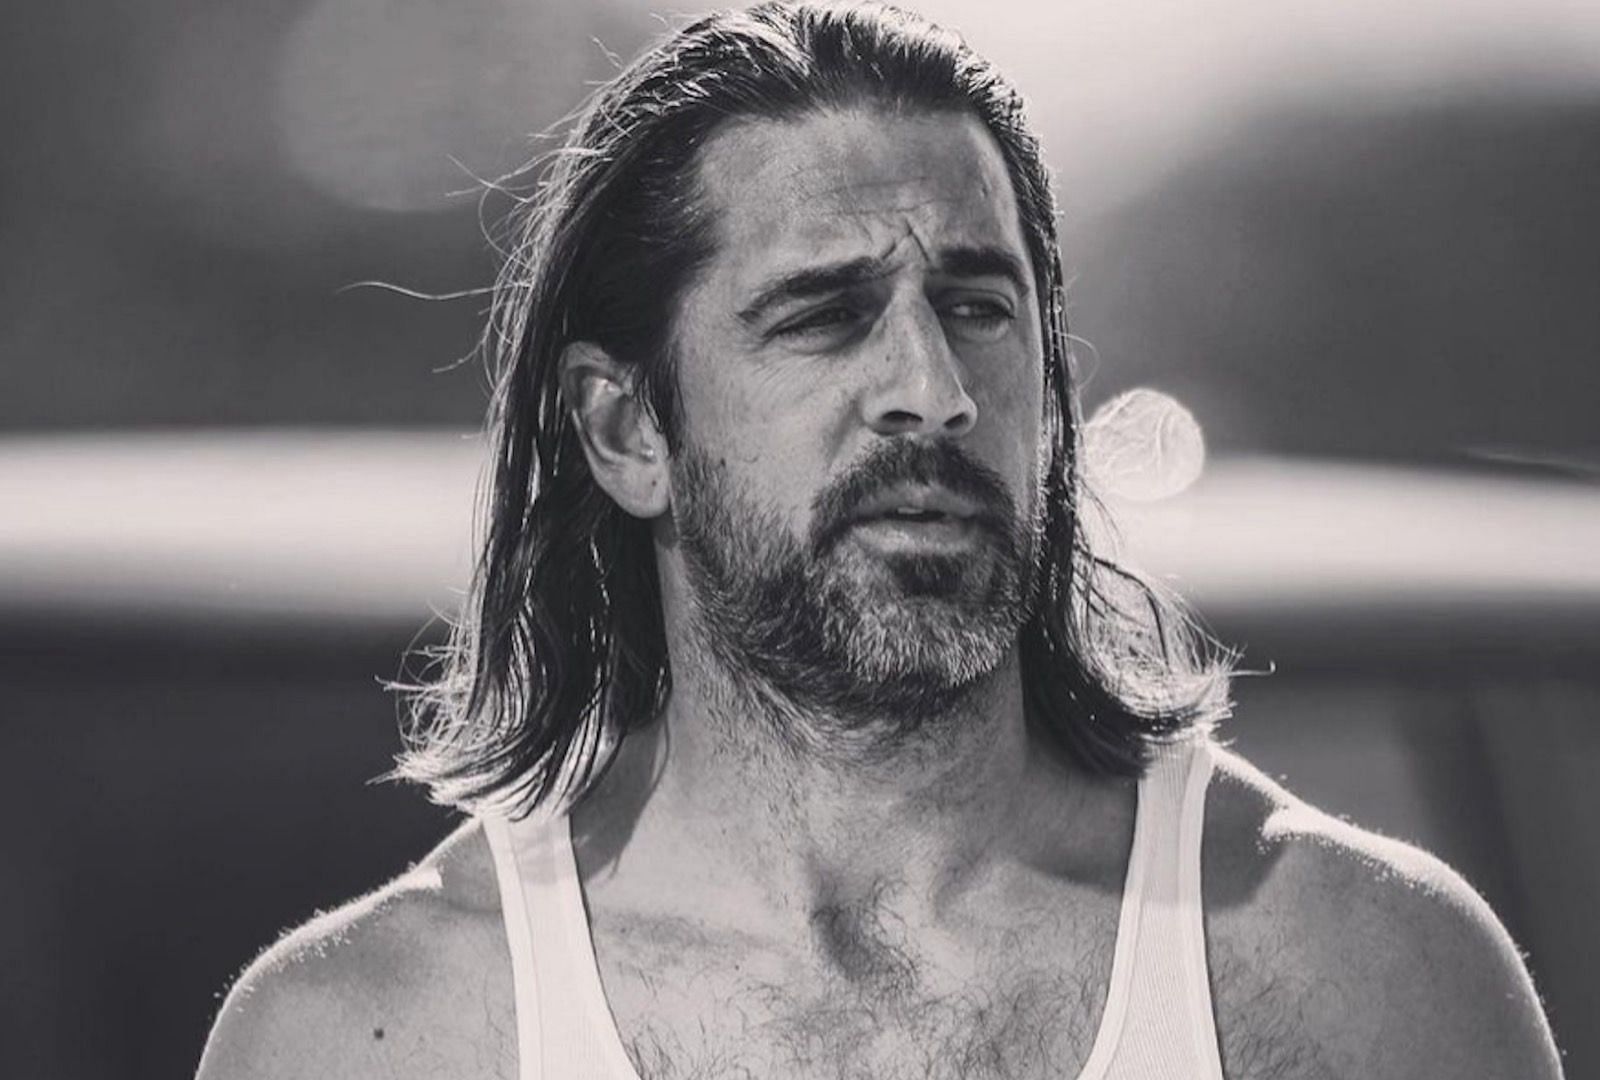 Aaron Rodgers seemed to emulate Nicolas Cage&#039;s look from Con Air as he arrived at the Packers&#039; training camp | Source: Instagram